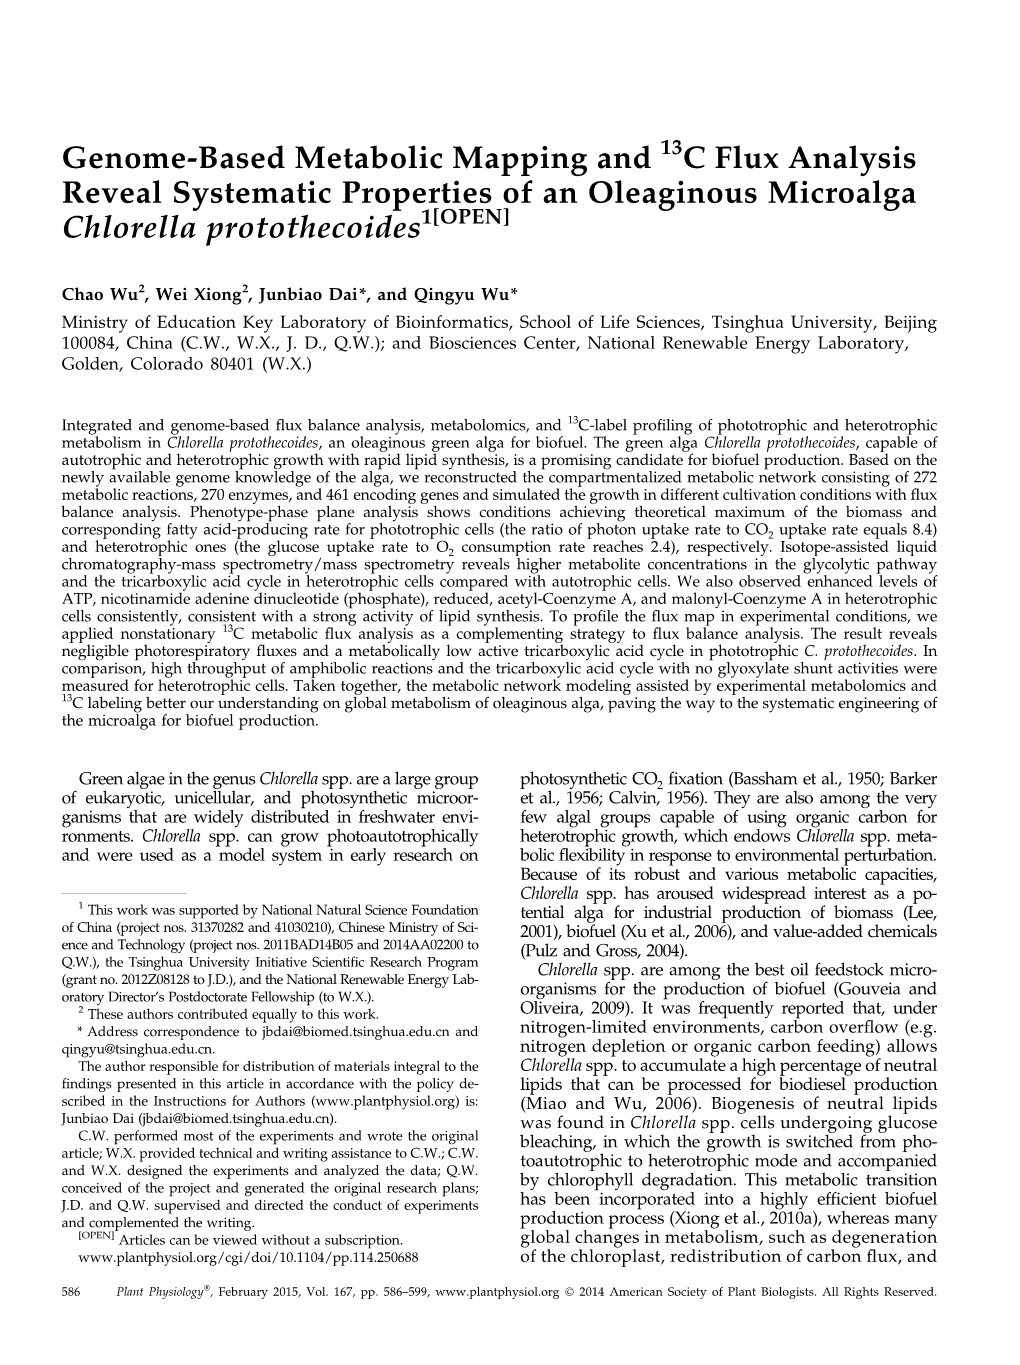 Genome-Based Metabolic Mapping and 13C Flux Analysis Reveal Systematic Properties of an Oleaginous Microalga Chlorella Protothecoides1[OPEN]